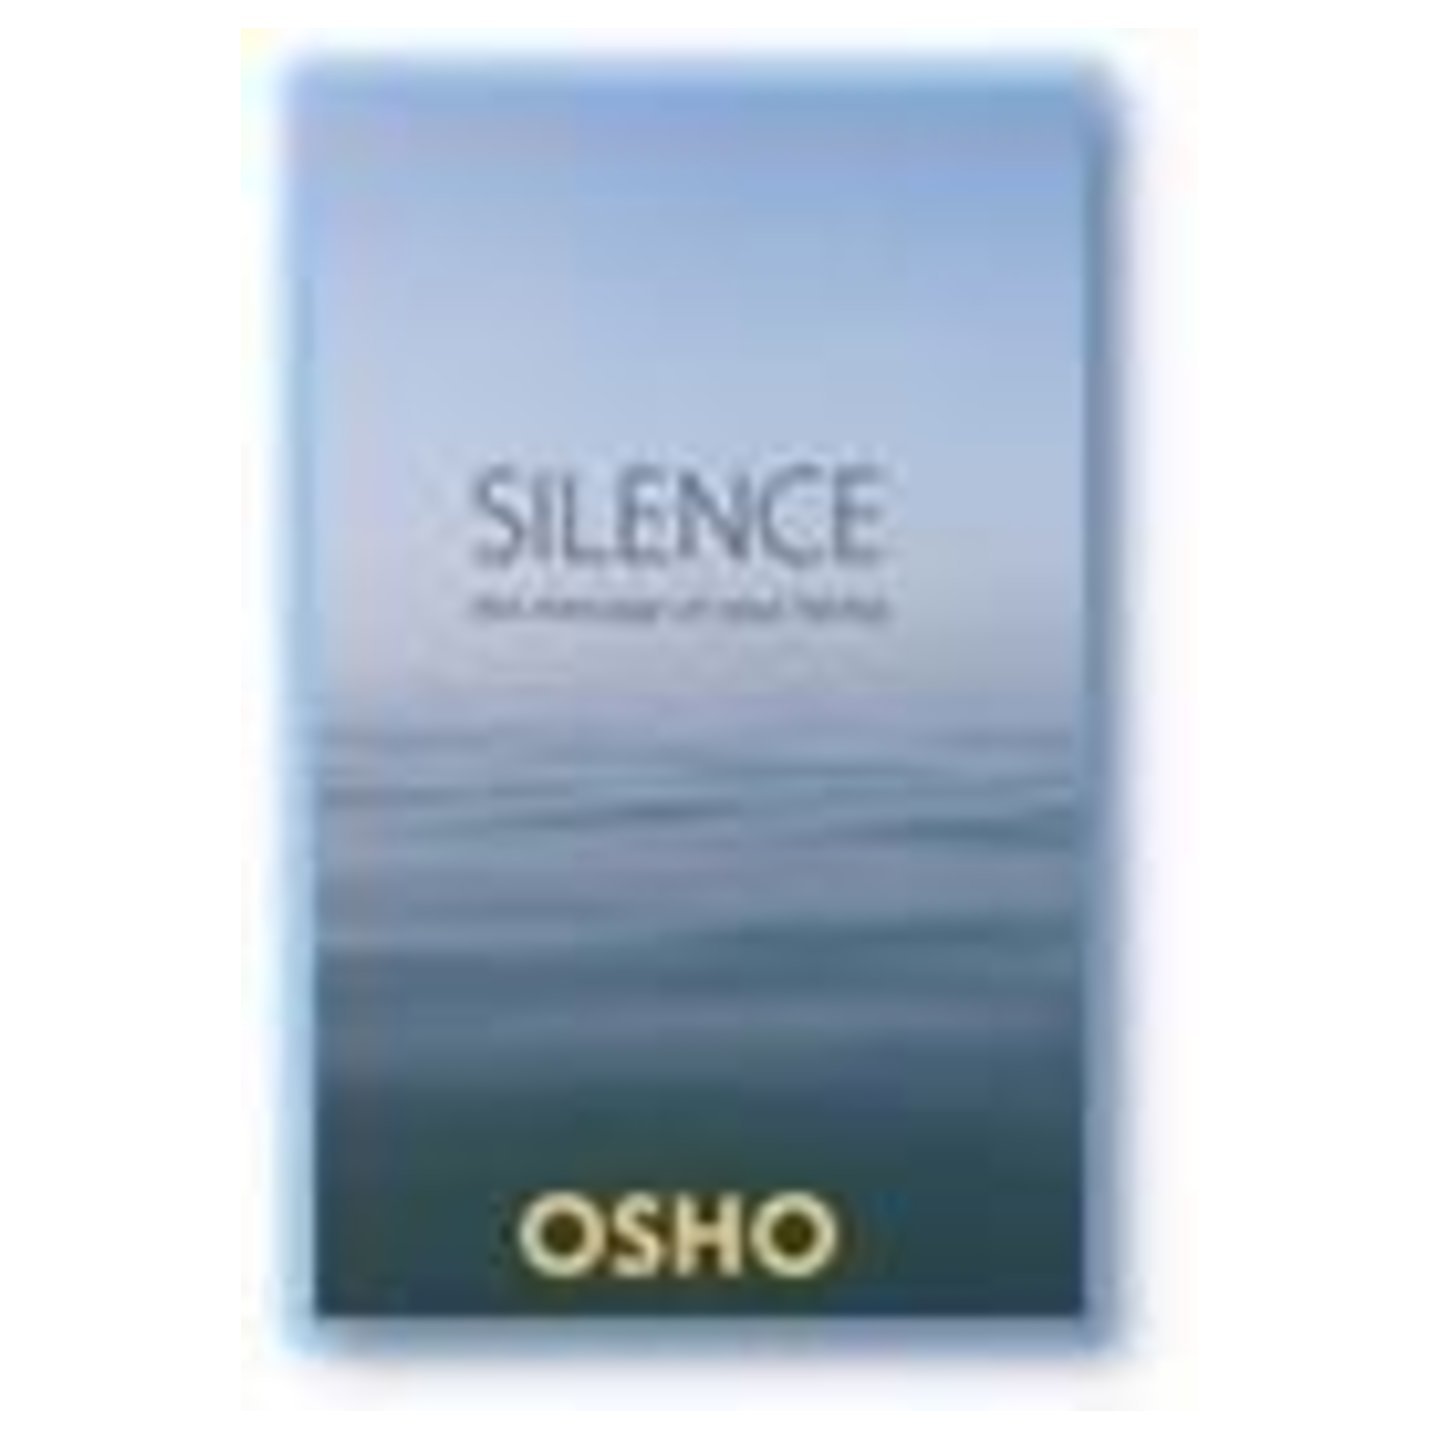 Silence: The Message Of Your Being